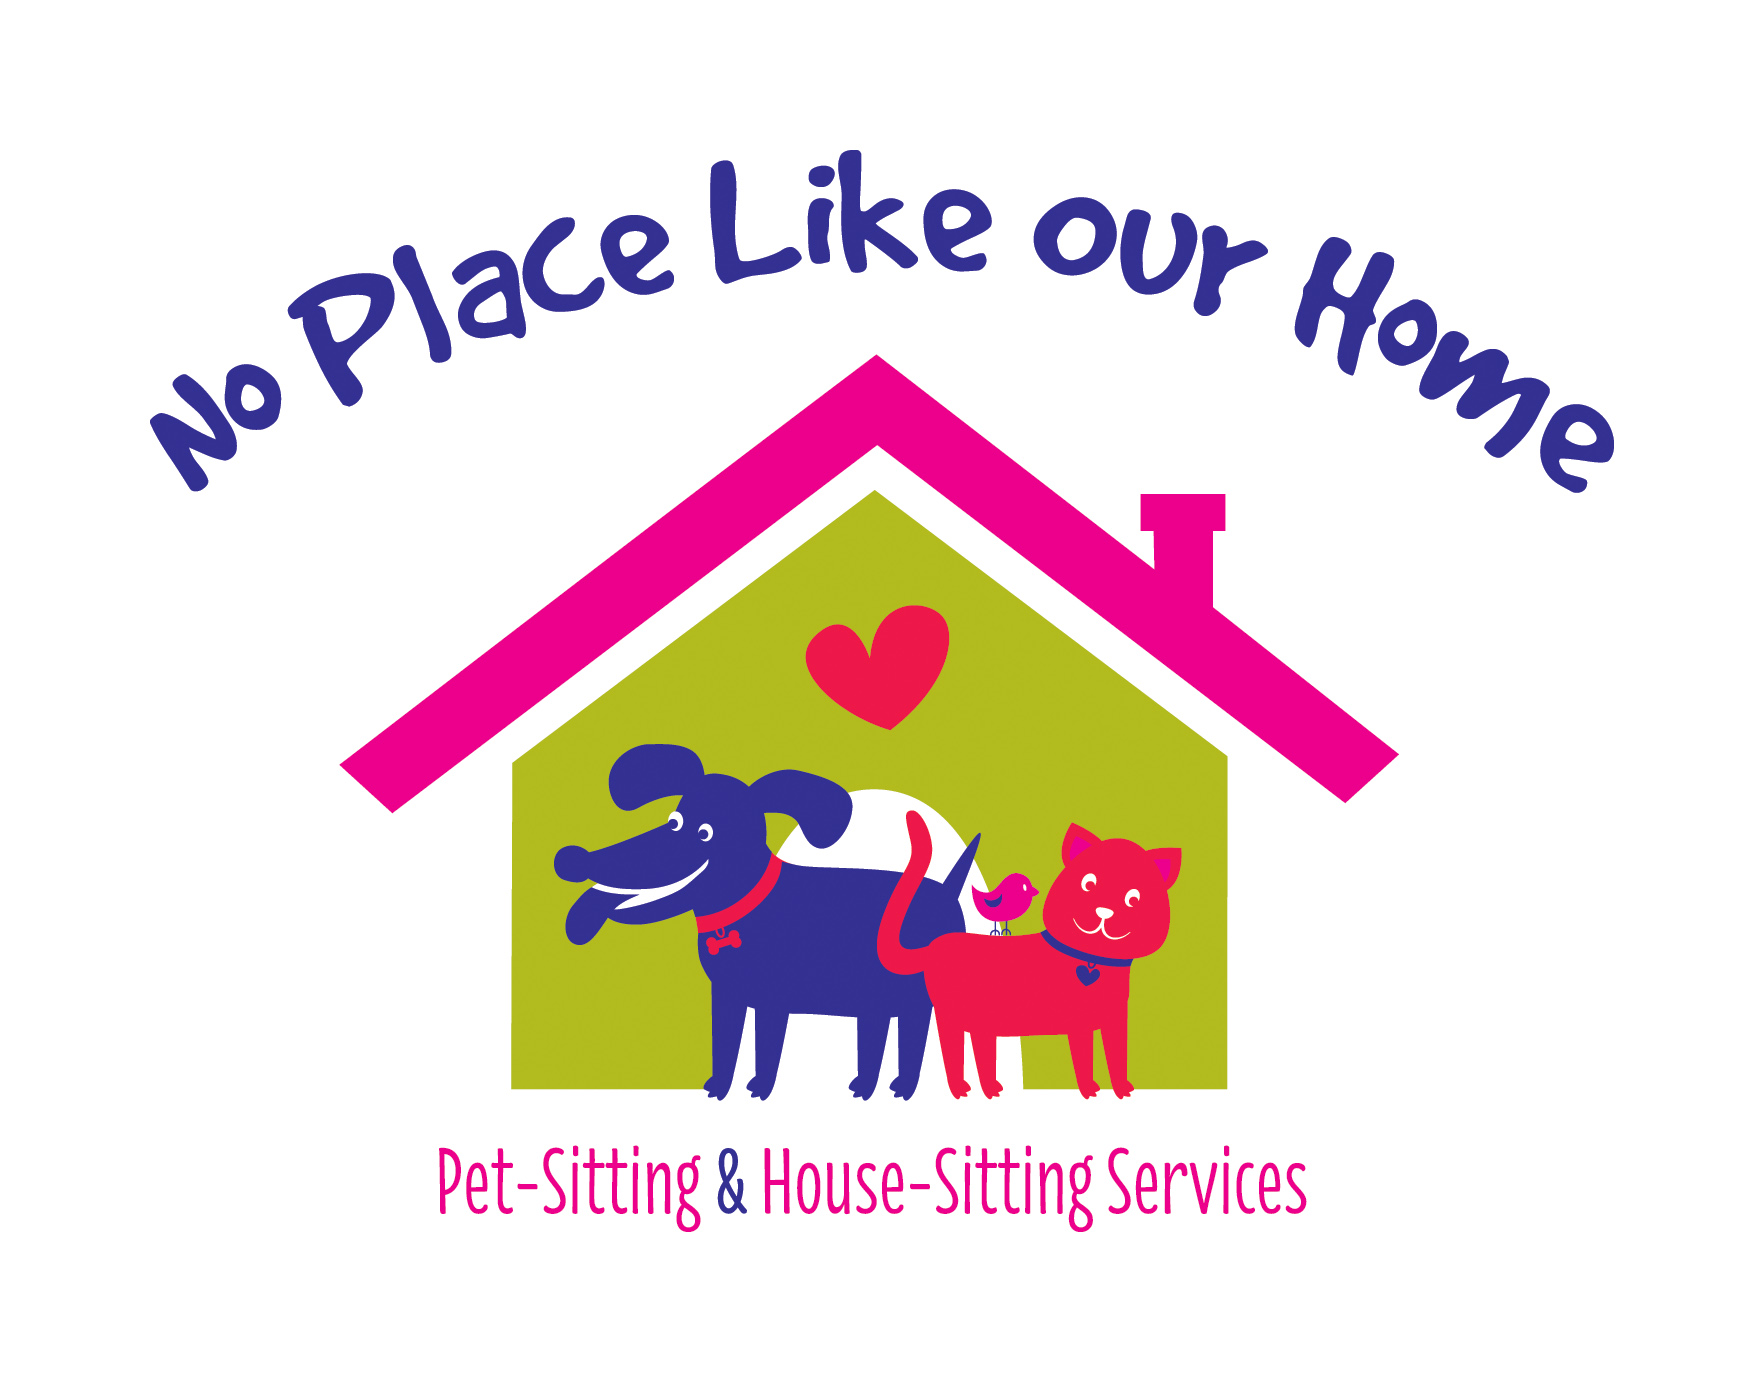 No Place Like Our Home Pet-Sitting